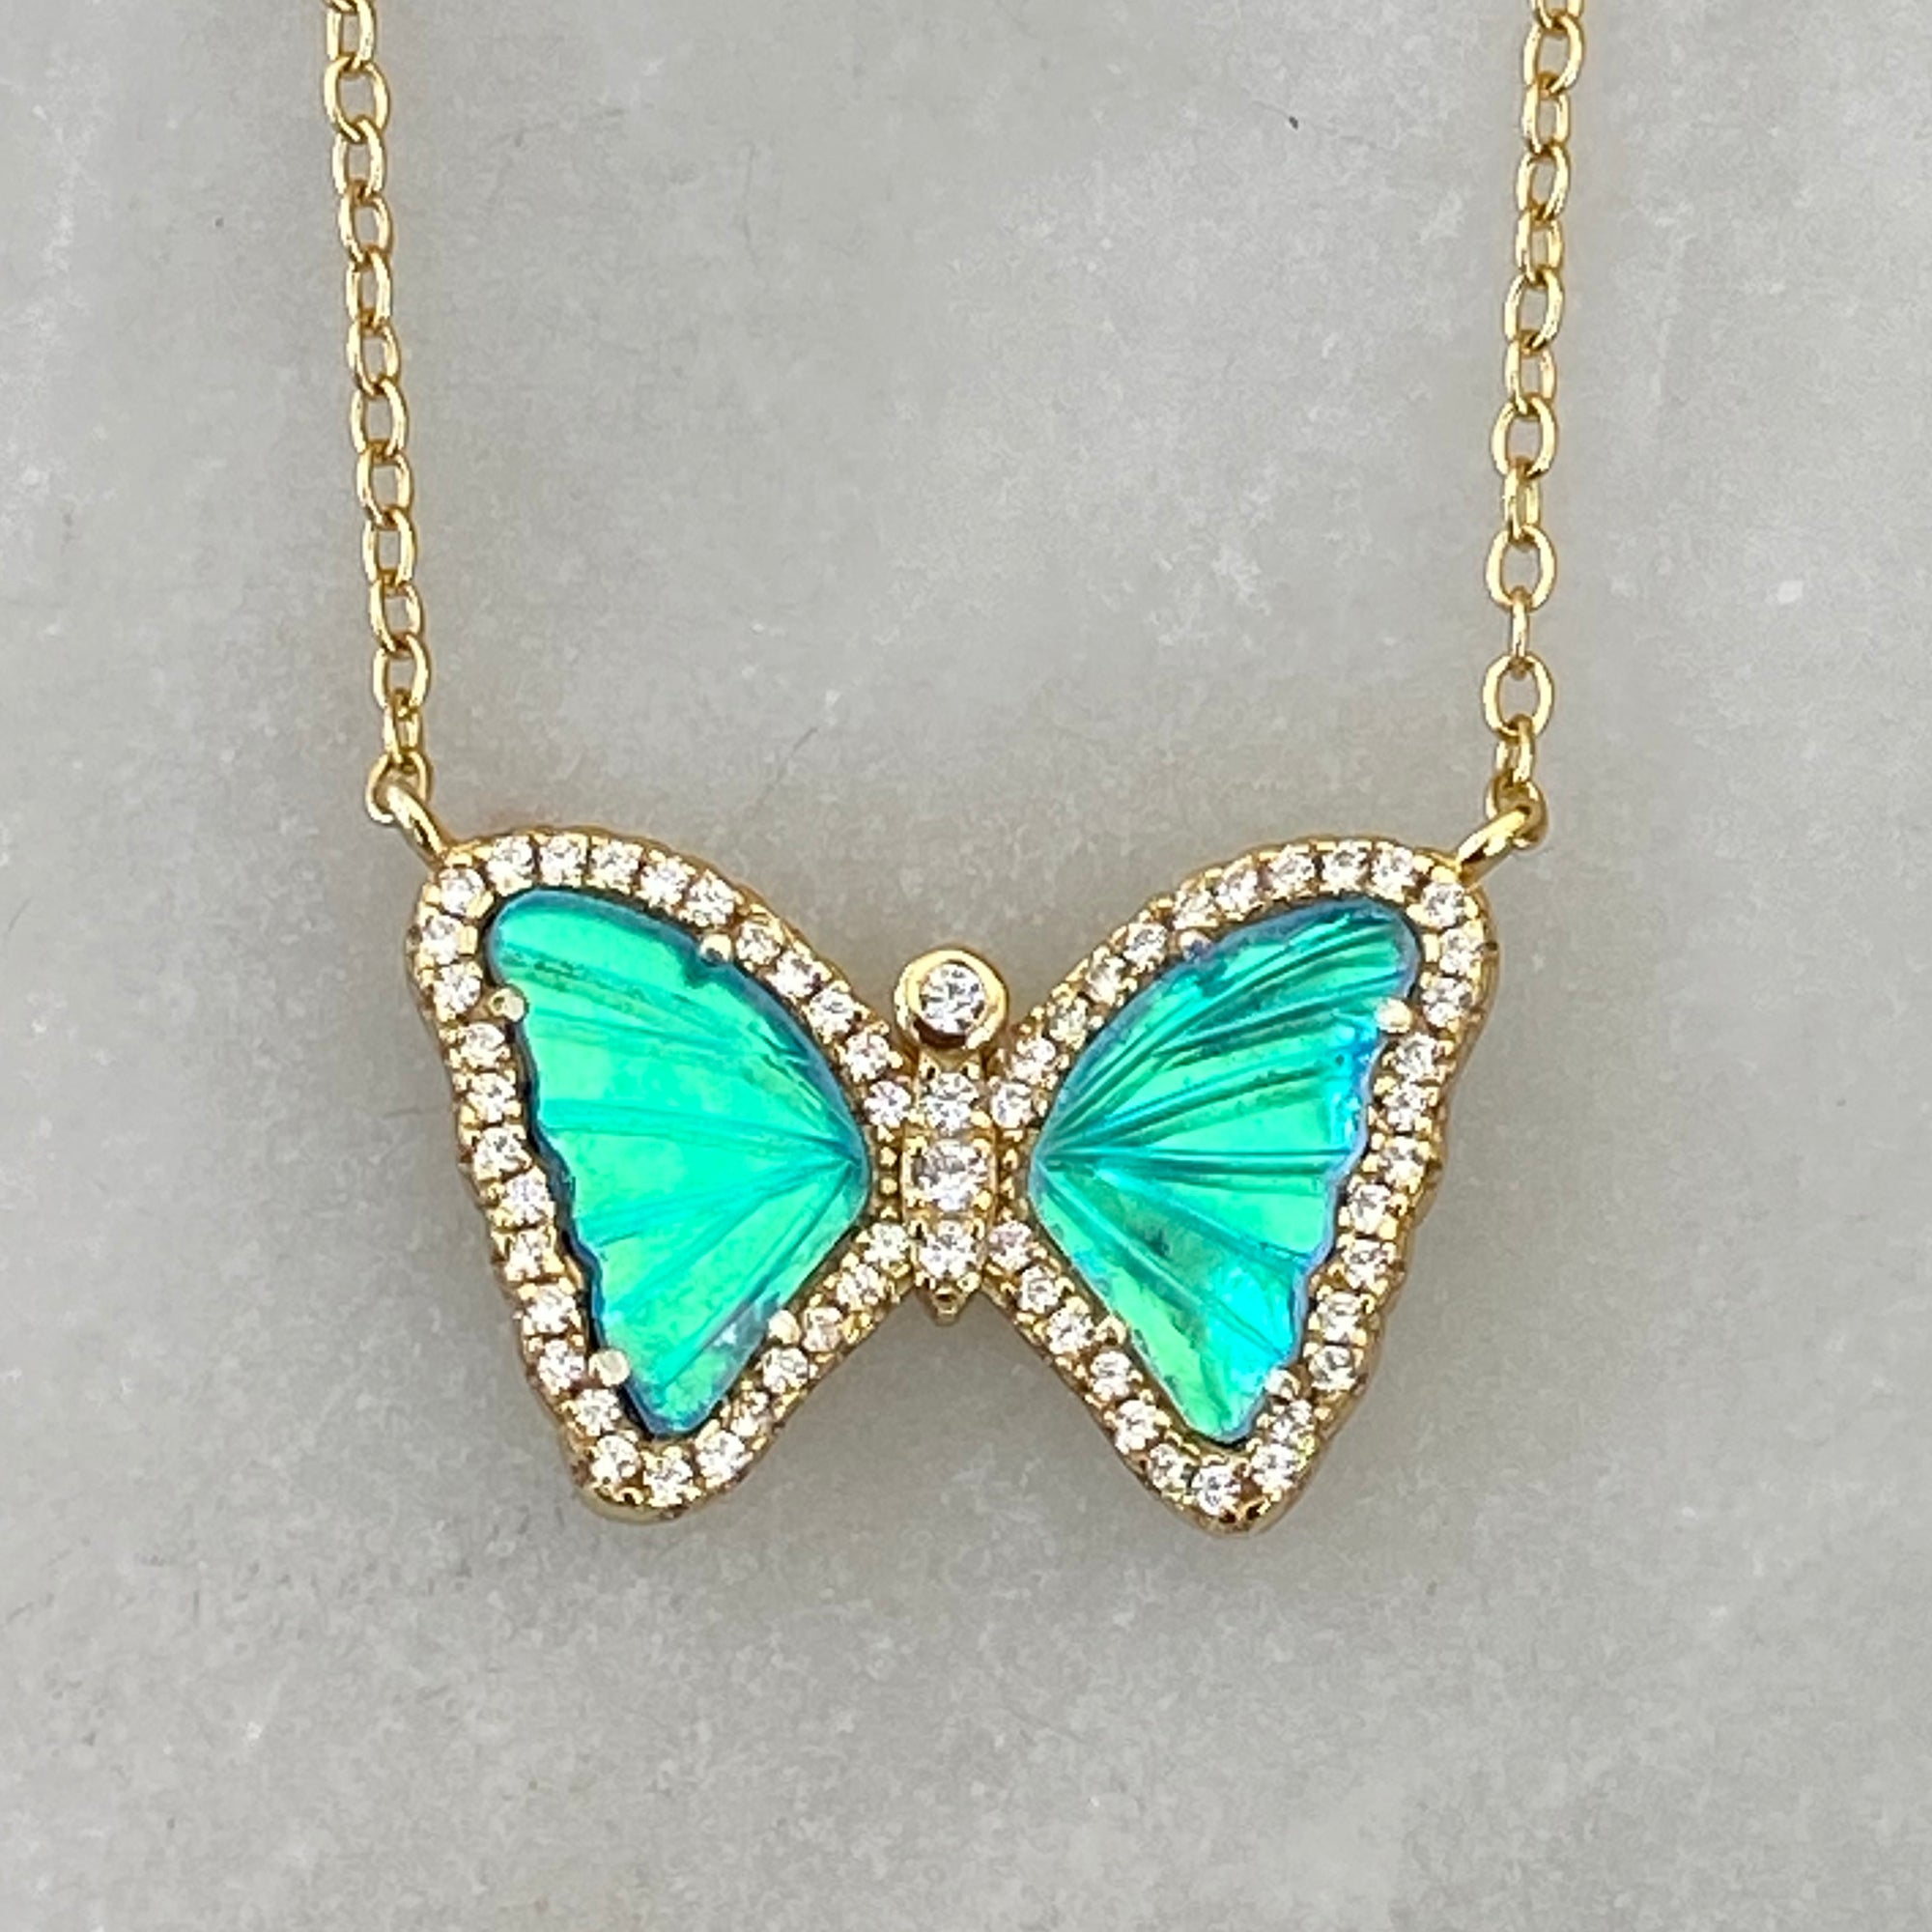 Limited Edition Morpho Butterfly Necklace